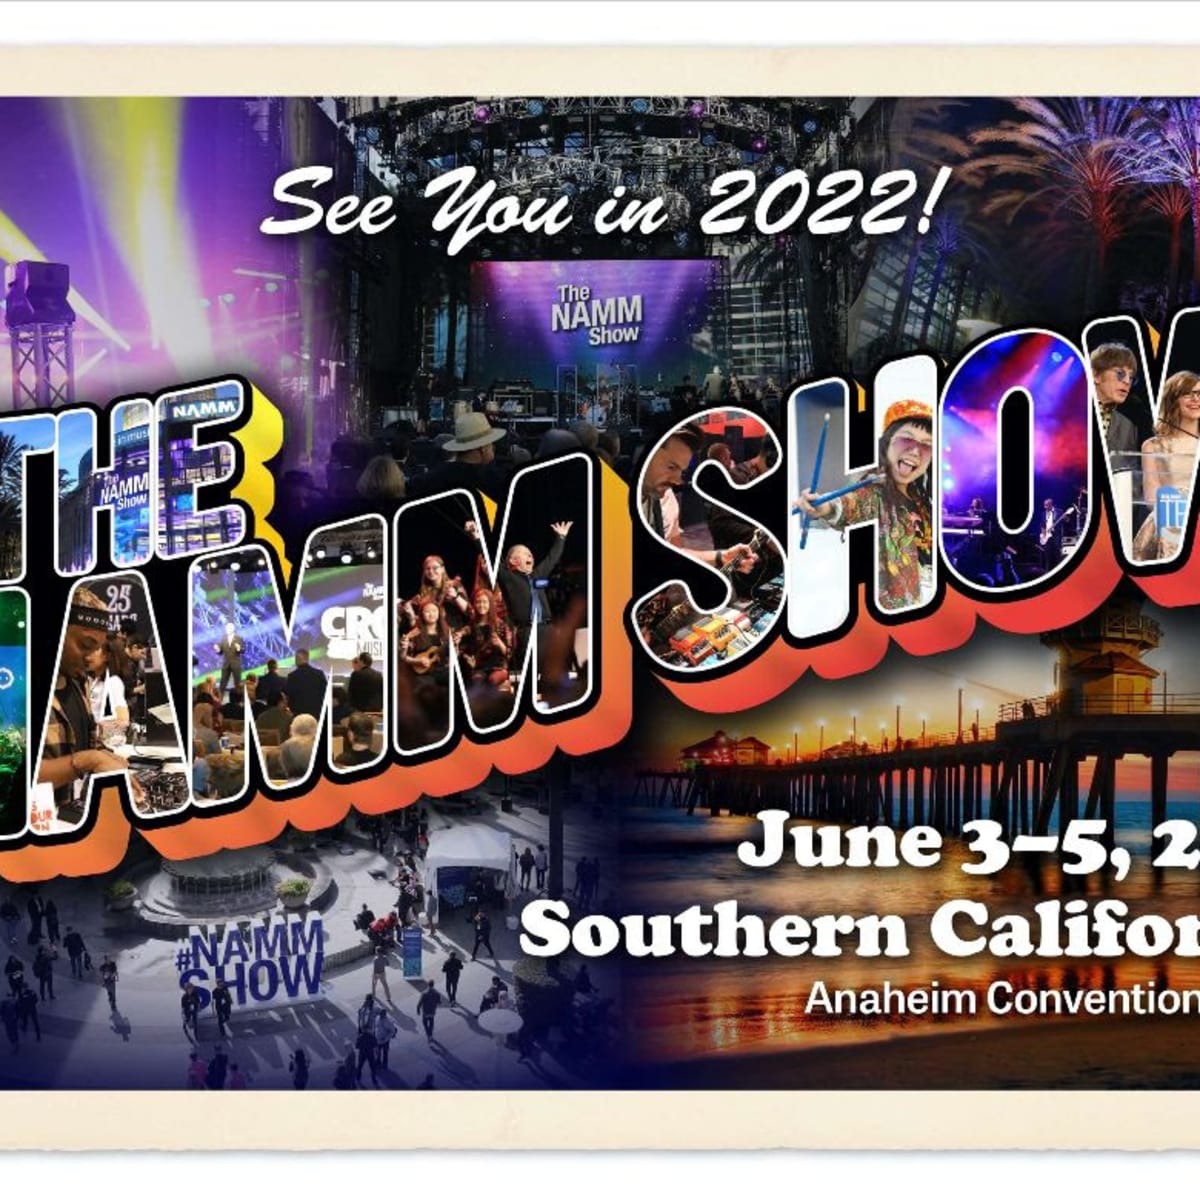 Namm 2022 Schedule Namm Show Moved From January To June 2022 - Magnetic Magazine